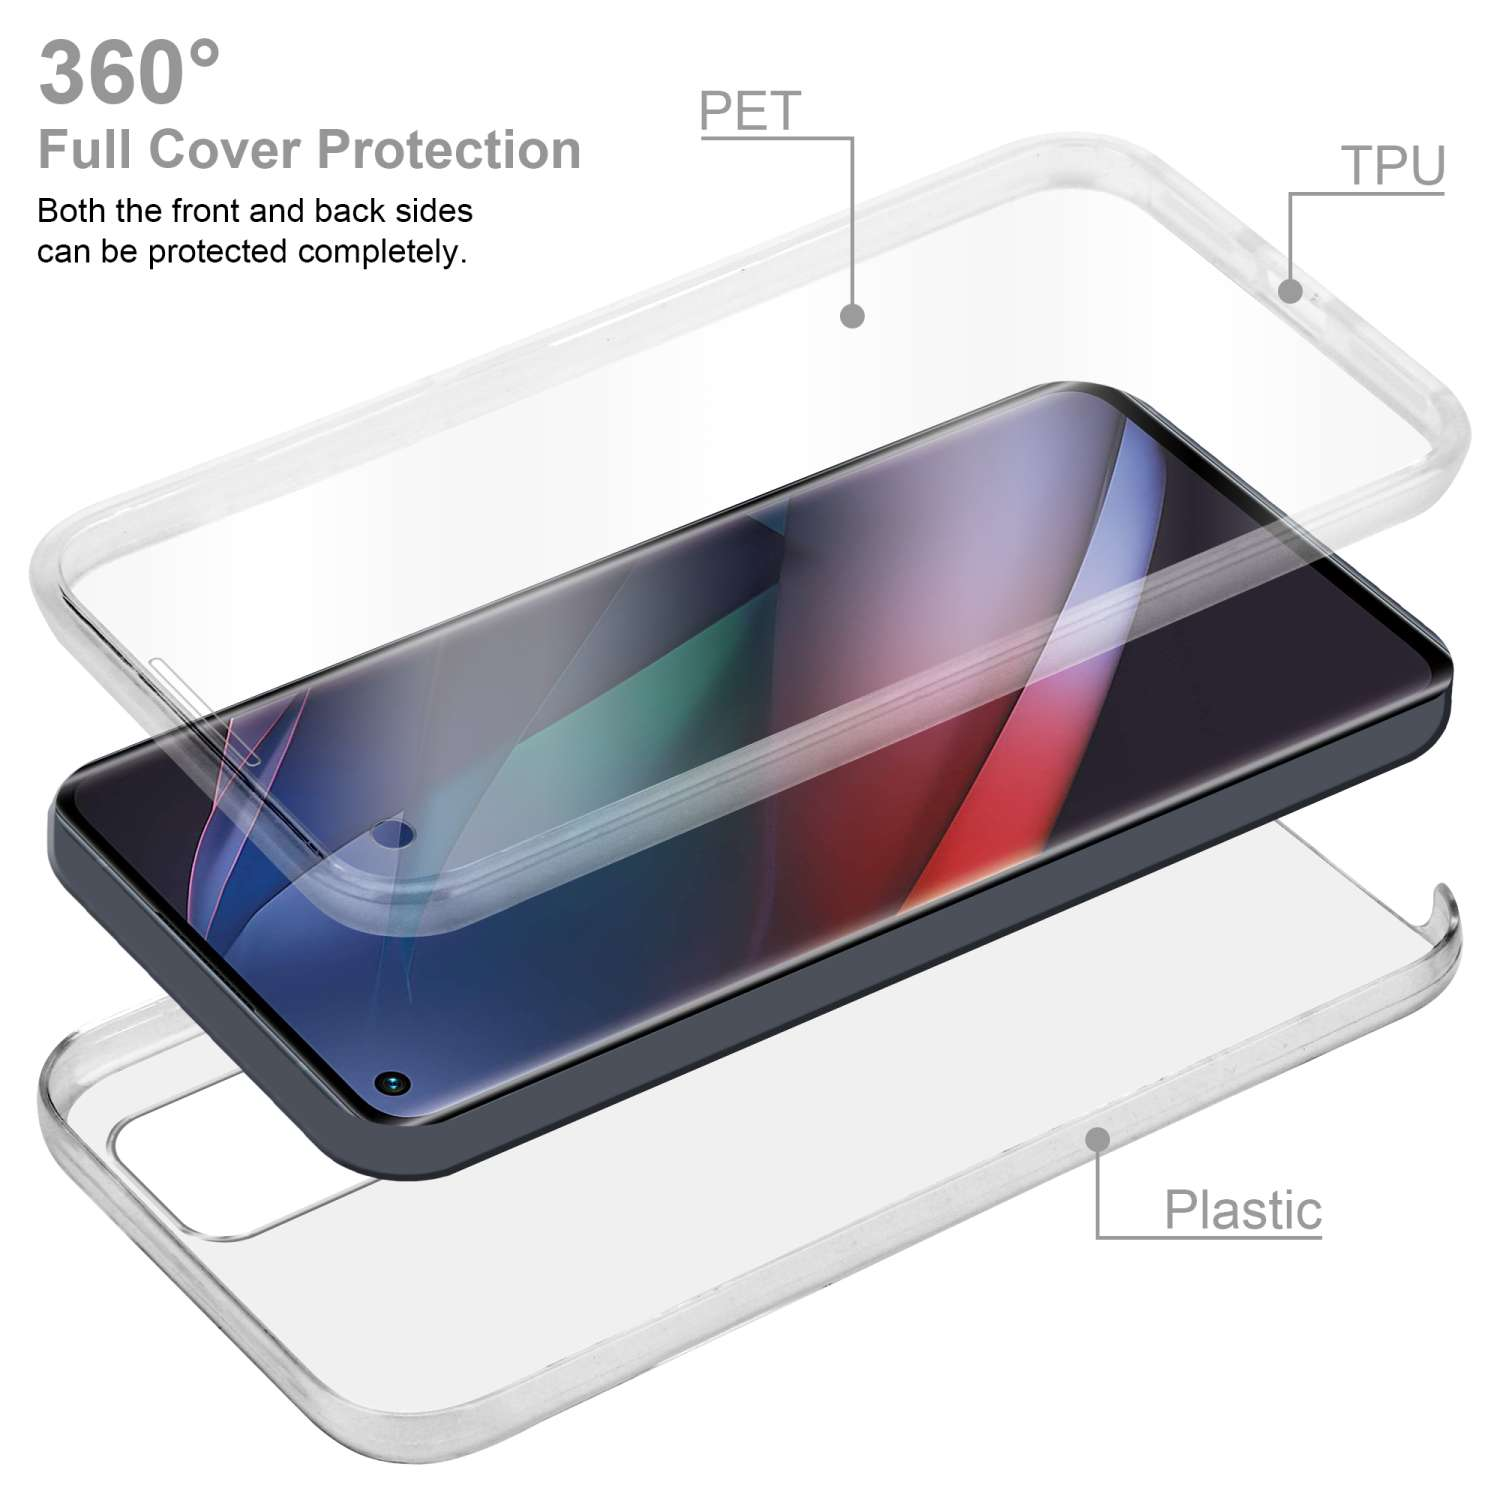 Oppo, NEO, CADORABO 360 X3 TRANSPARENT FIND Case Hülle, TPU Grad Backcover,